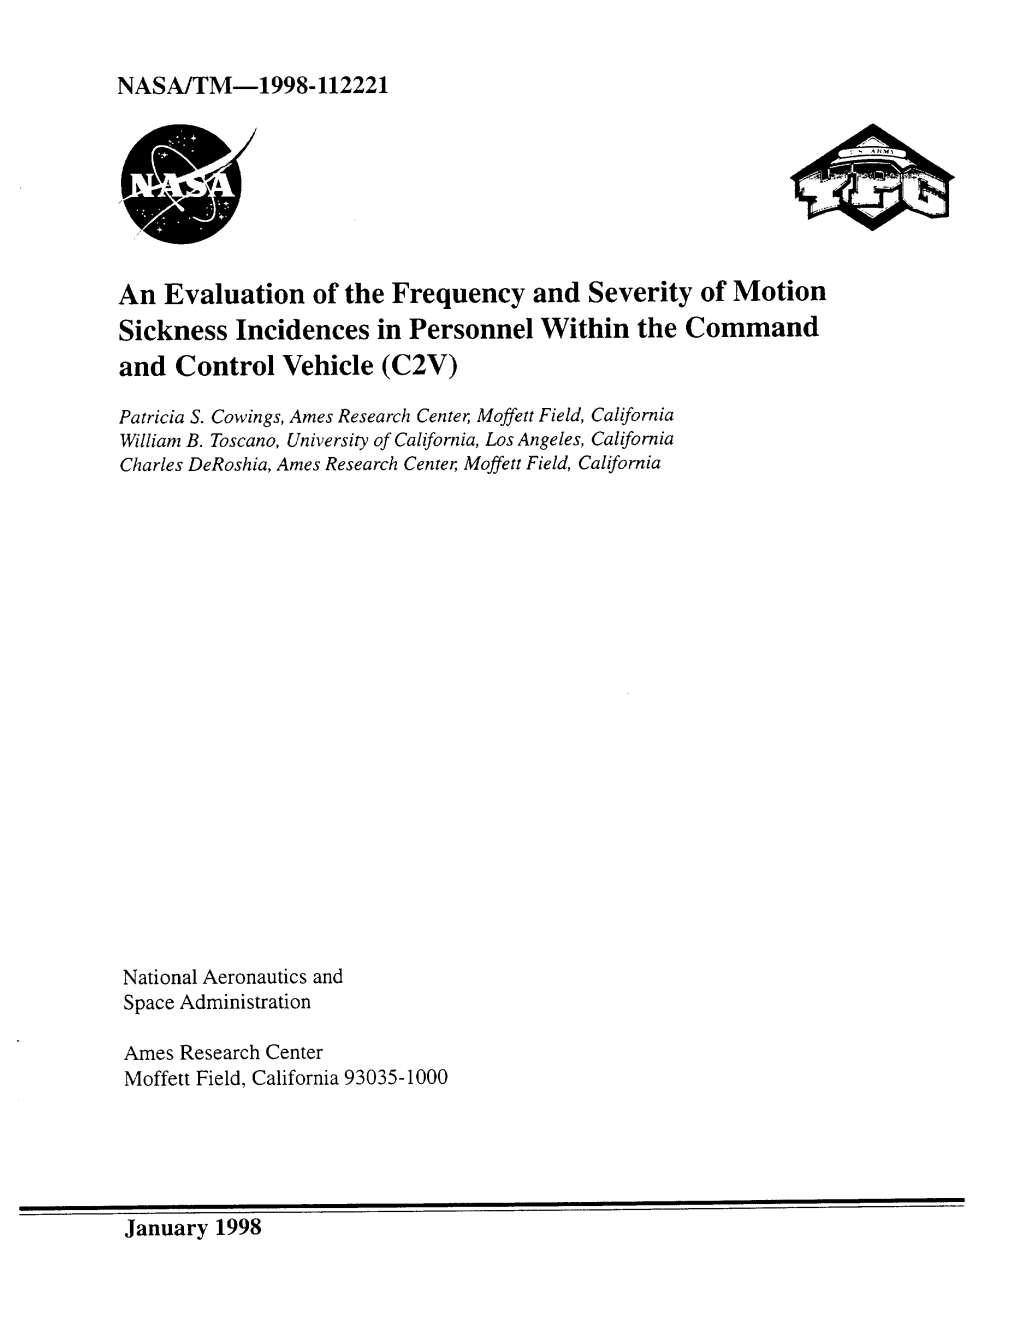 An Evaluation of the Frequency and Severity of Motion Sickness Incidences in Personnel Within the Command and Control Vehicle (C2V)